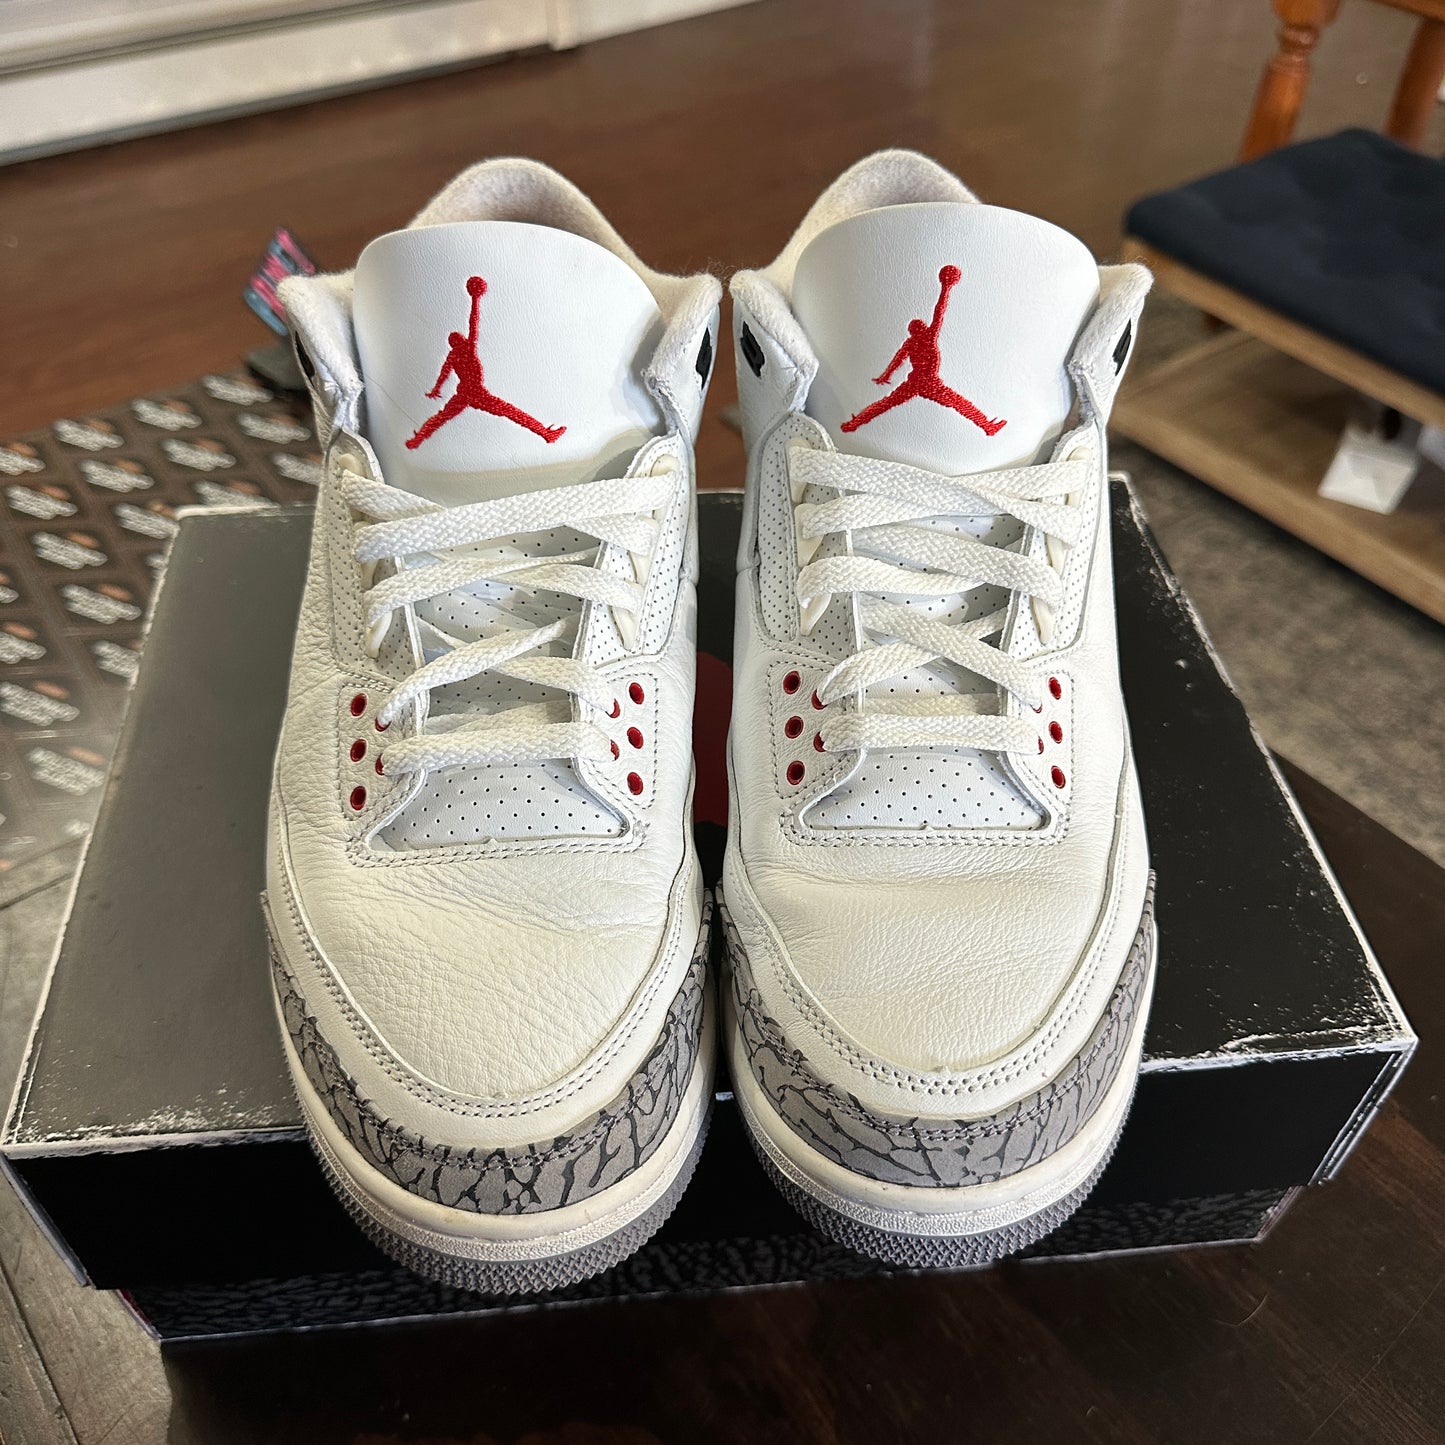 *USED* Air Jordan 3 Reimagined White Cement (size 10)